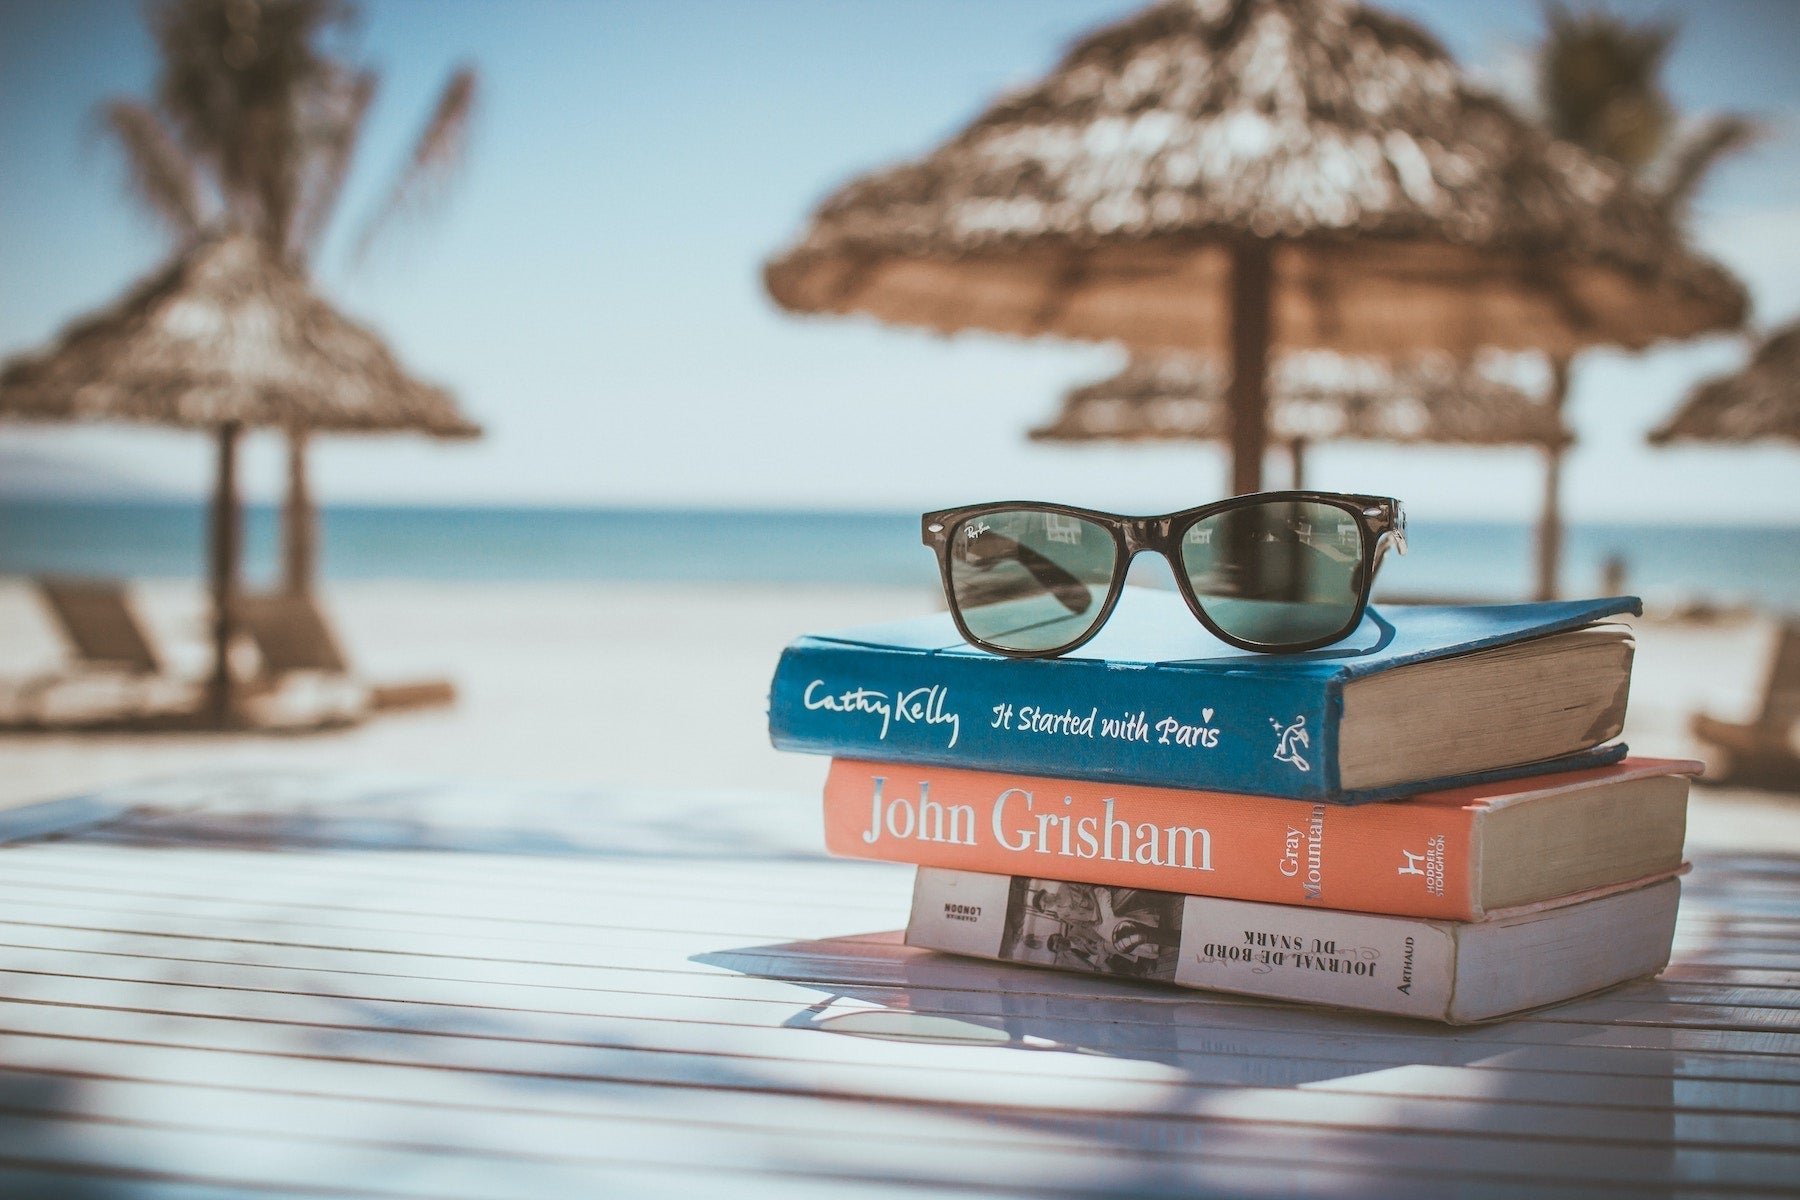 Get Your Beach Read On With These 7 Summer Reading Challenges - Antsy Labs